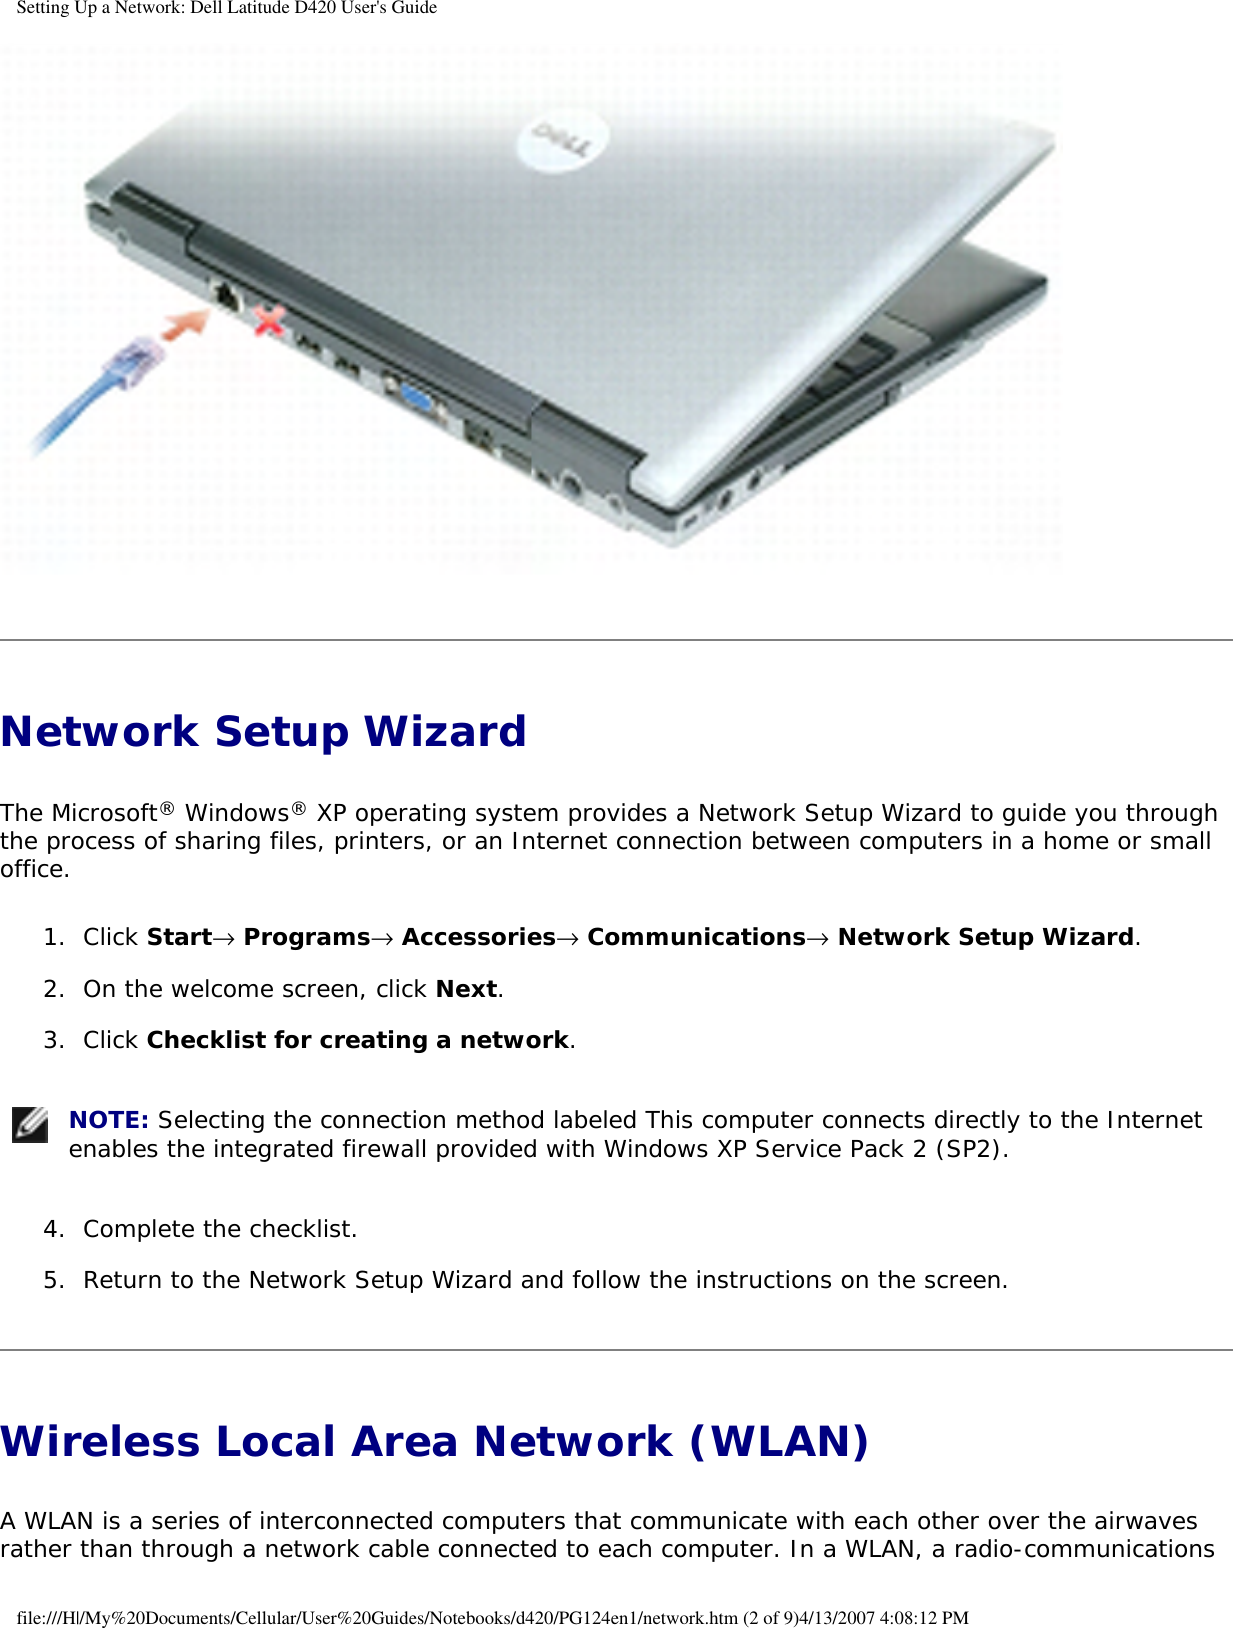 Setting Up a Network: Dell Latitude D420 User&apos;s Guide Network Setup Wizard The Microsoft® Windows® XP operating system provides a Network Setup Wizard to guide you through the process of sharing files, printers, or an Internet connection between computers in a home or small office.1.  Click Start→ Programs→ Accessories→ Communications→ Network Setup Wizard.   2.  On the welcome screen, click Next.   3.  Click Checklist for creating a network.    NOTE: Selecting the connection method labeled This computer connects directly to the Internet enables the integrated firewall provided with Windows XP Service Pack 2 (SP2). 4.  Complete the checklist.   5.  Return to the Network Setup Wizard and follow the instructions on the screen.   Wireless Local Area Network (WLAN) A WLAN is a series of interconnected computers that communicate with each other over the airwaves rather than through a network cable connected to each computer. In a WLAN, a radio-communications file:///H|/My%20Documents/Cellular/User%20Guides/Notebooks/d420/PG124en1/network.htm (2 of 9)4/13/2007 4:08:12 PM